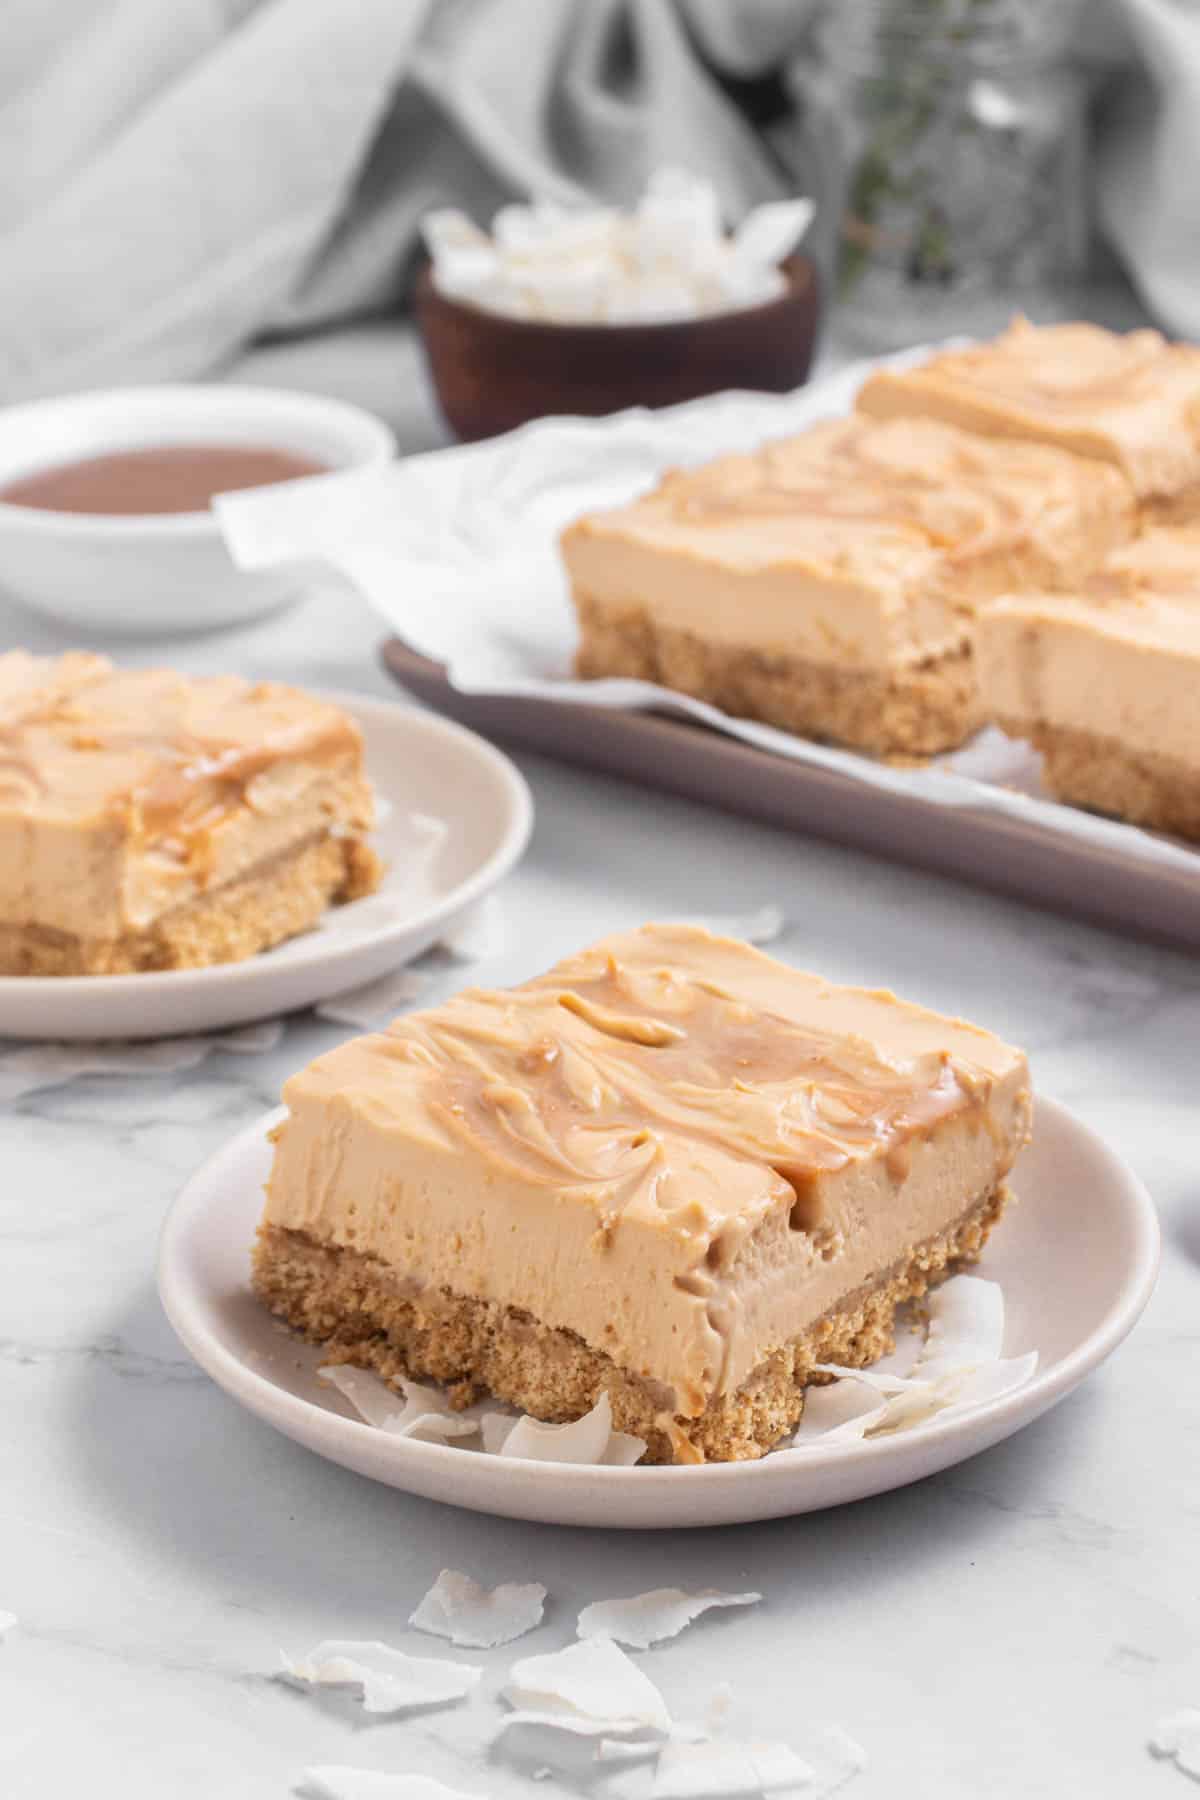 Cheesecake slices on a white plate with a small bowl of caramel in the background.